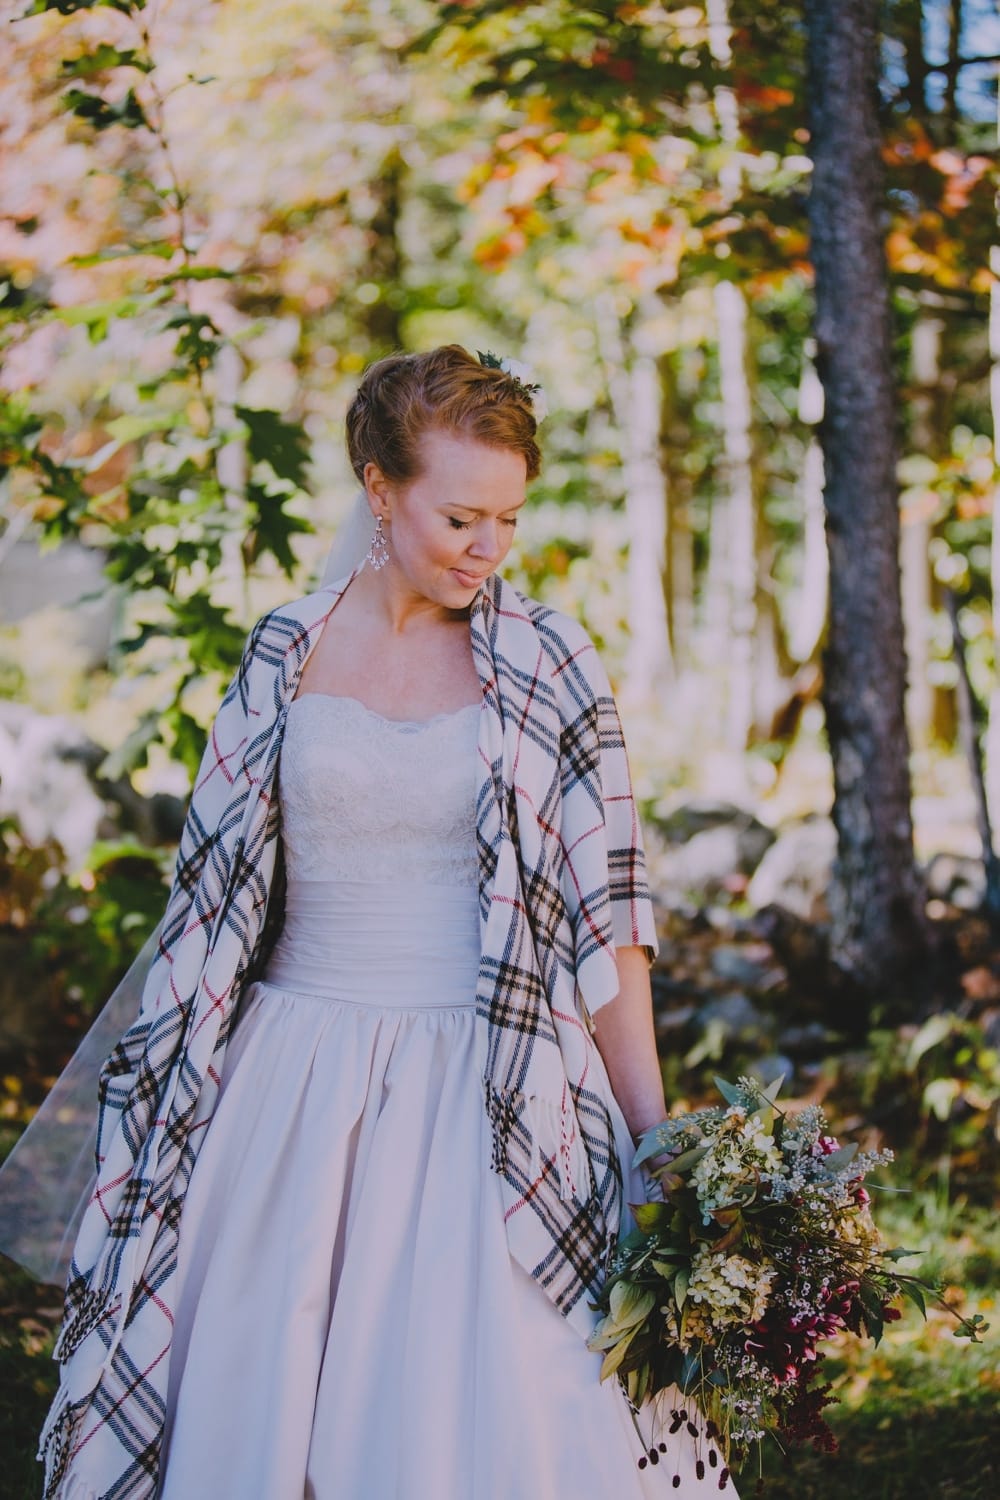 An artistic and natural portrait of a bride during her fall wedding at the rustic Kitz Farm in New Hampshire